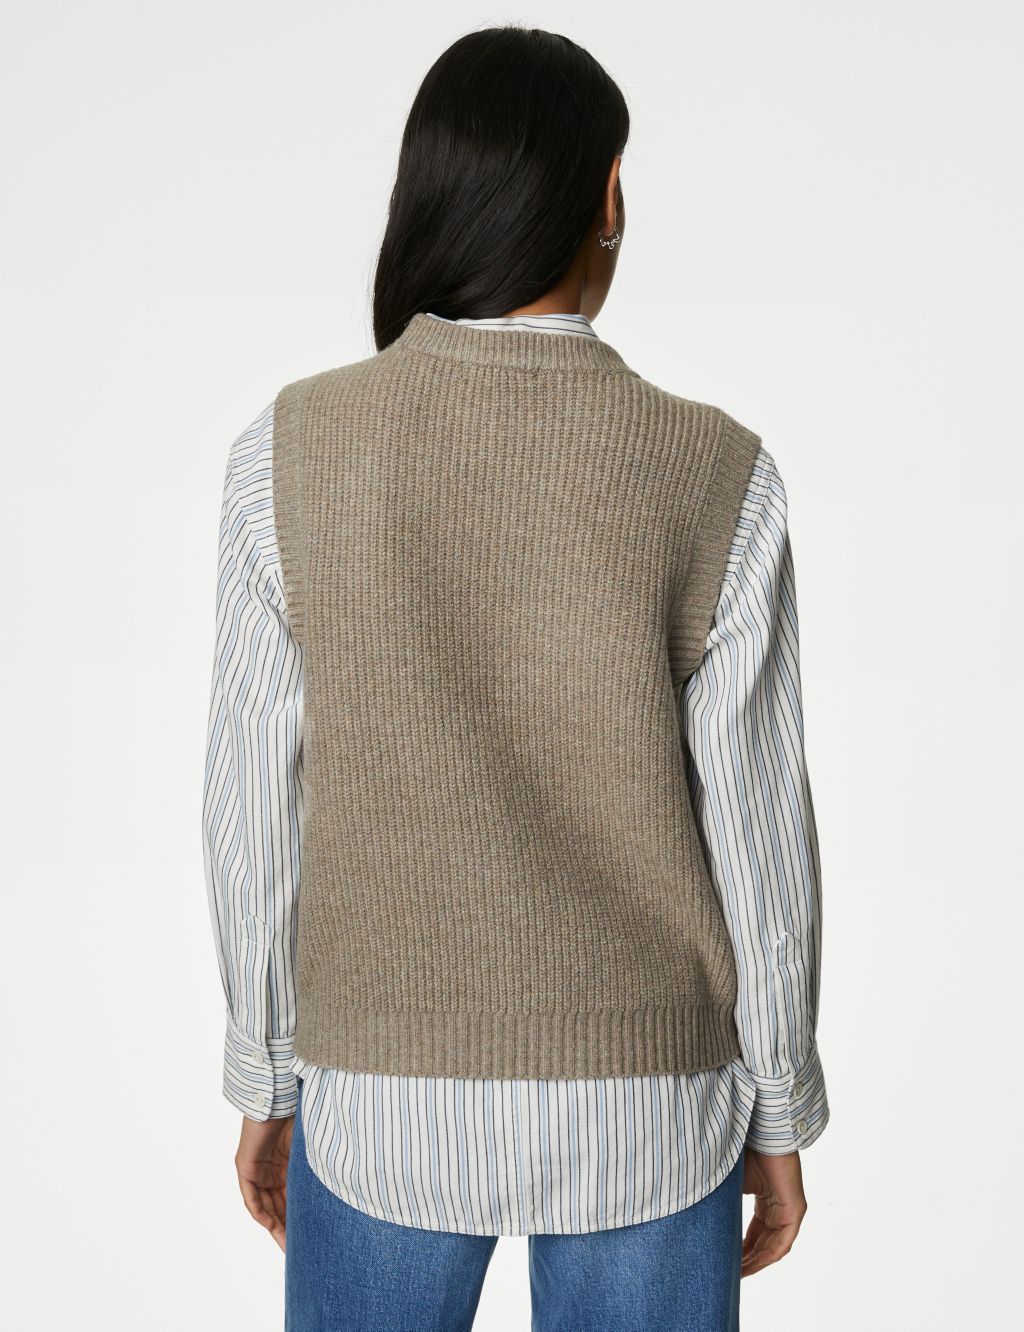 Ribbed Crew Neck Knitted Vest image 5